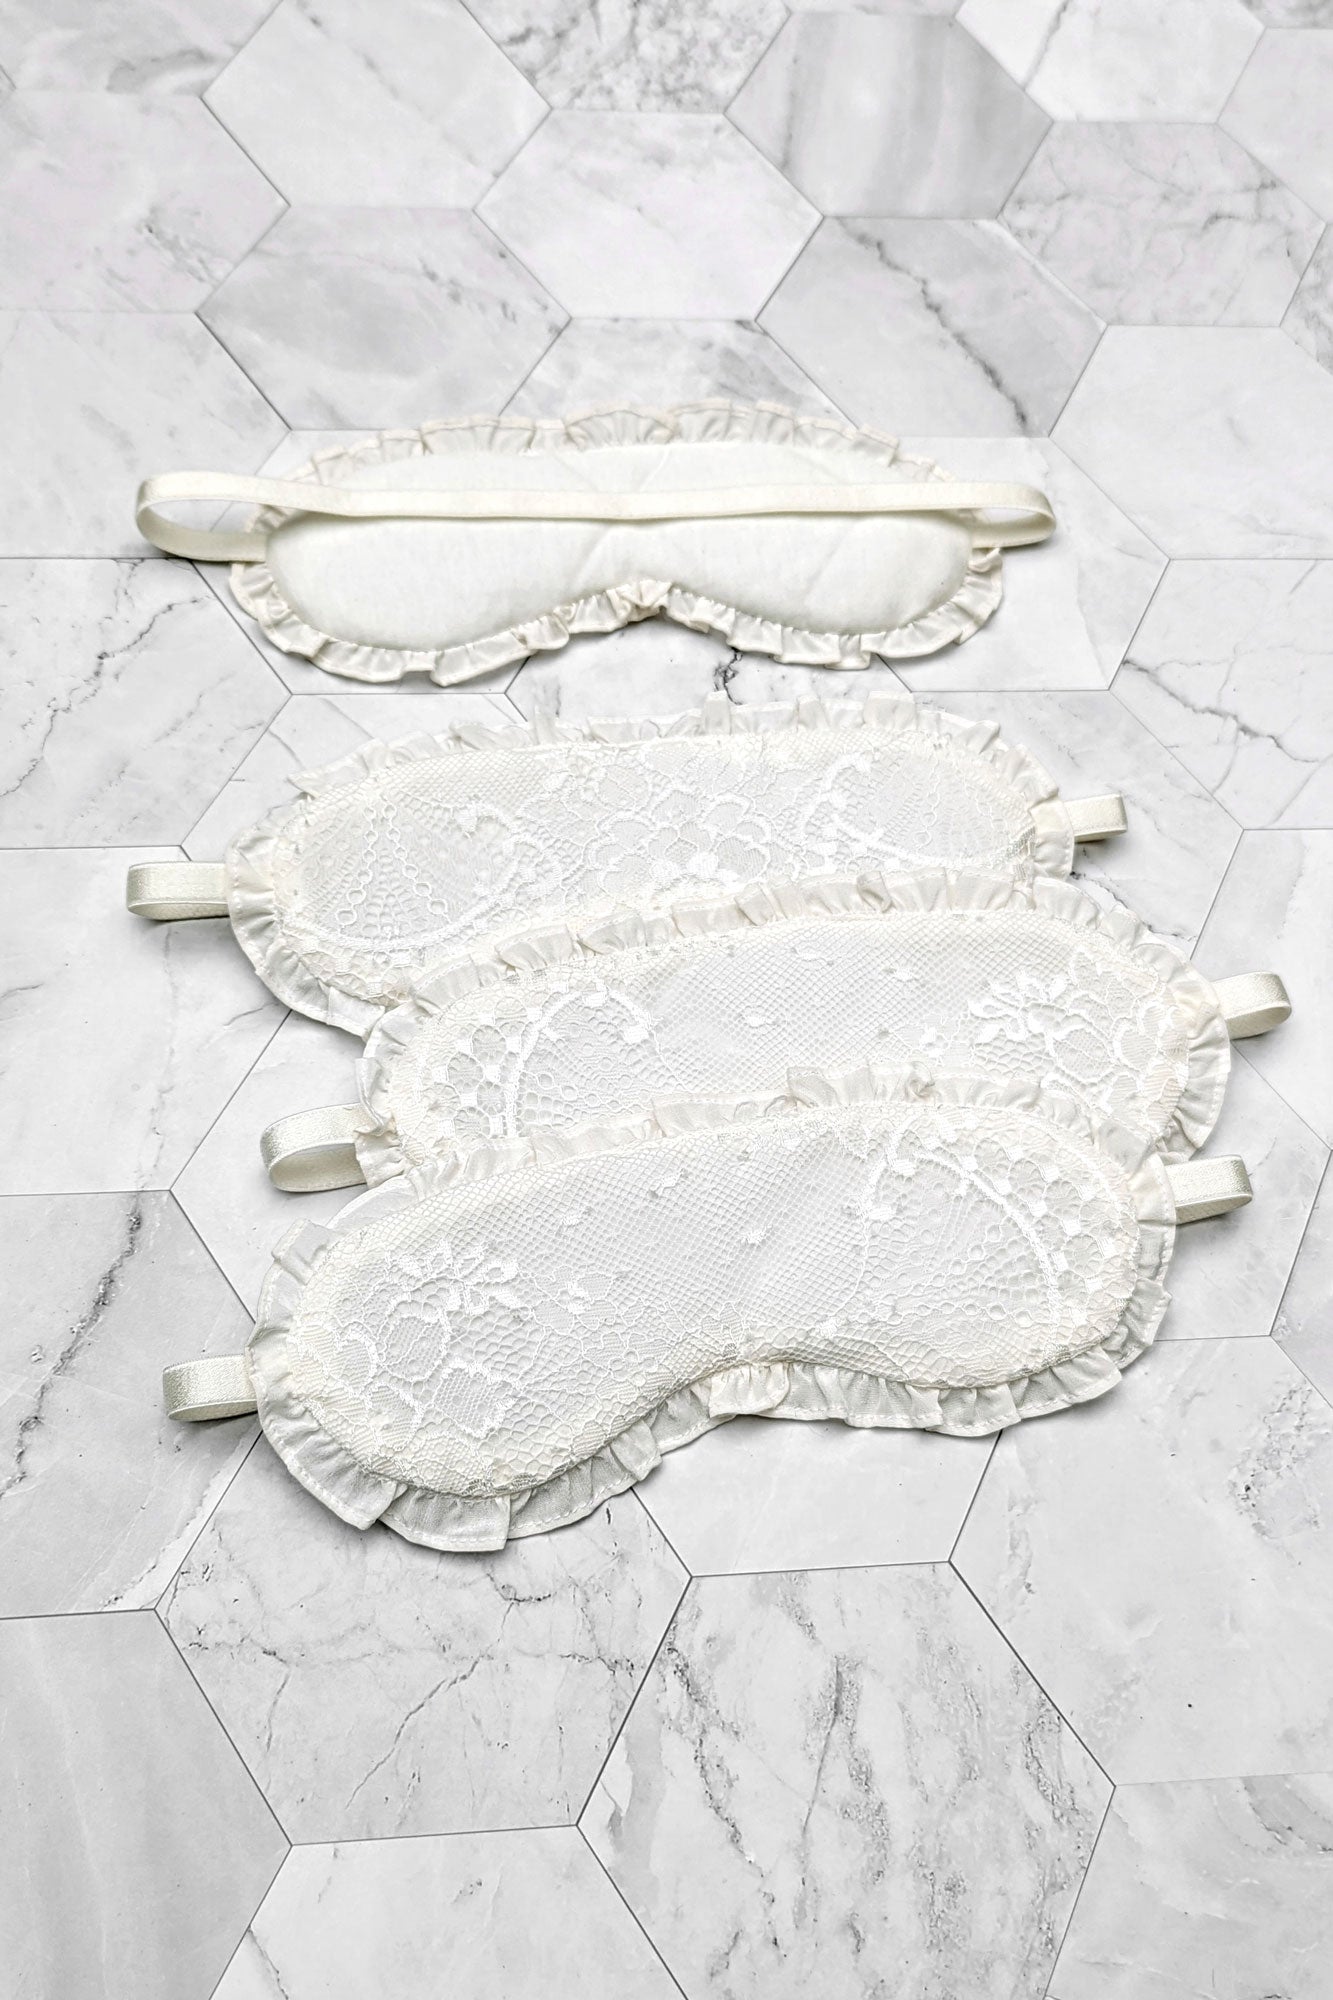 Silk sleep masks in white lace for brides and wedding gifts